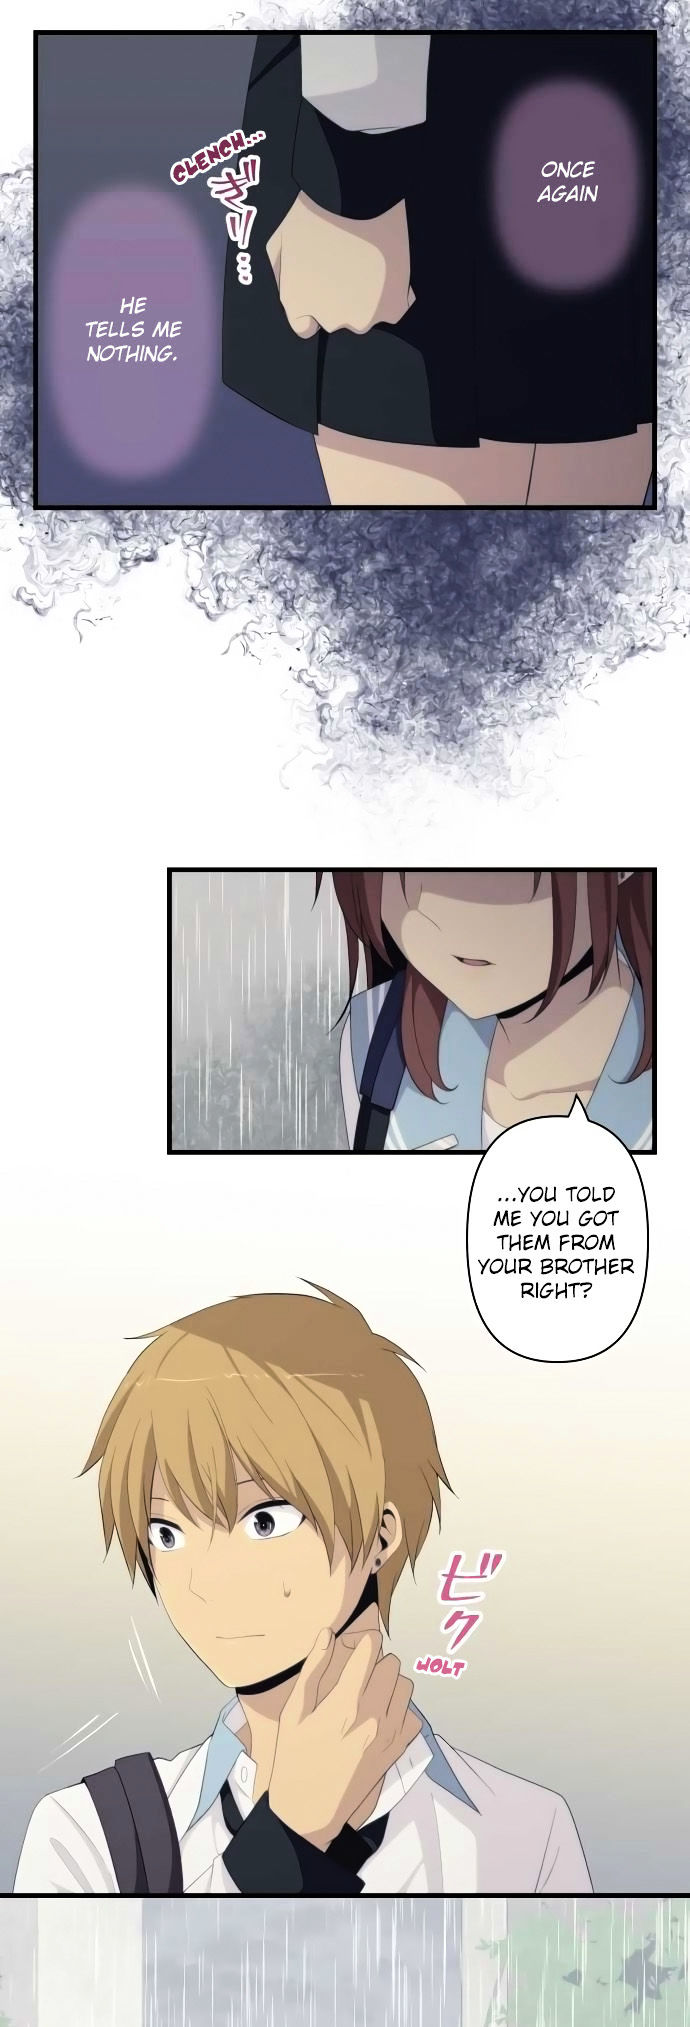 Relife 165 5